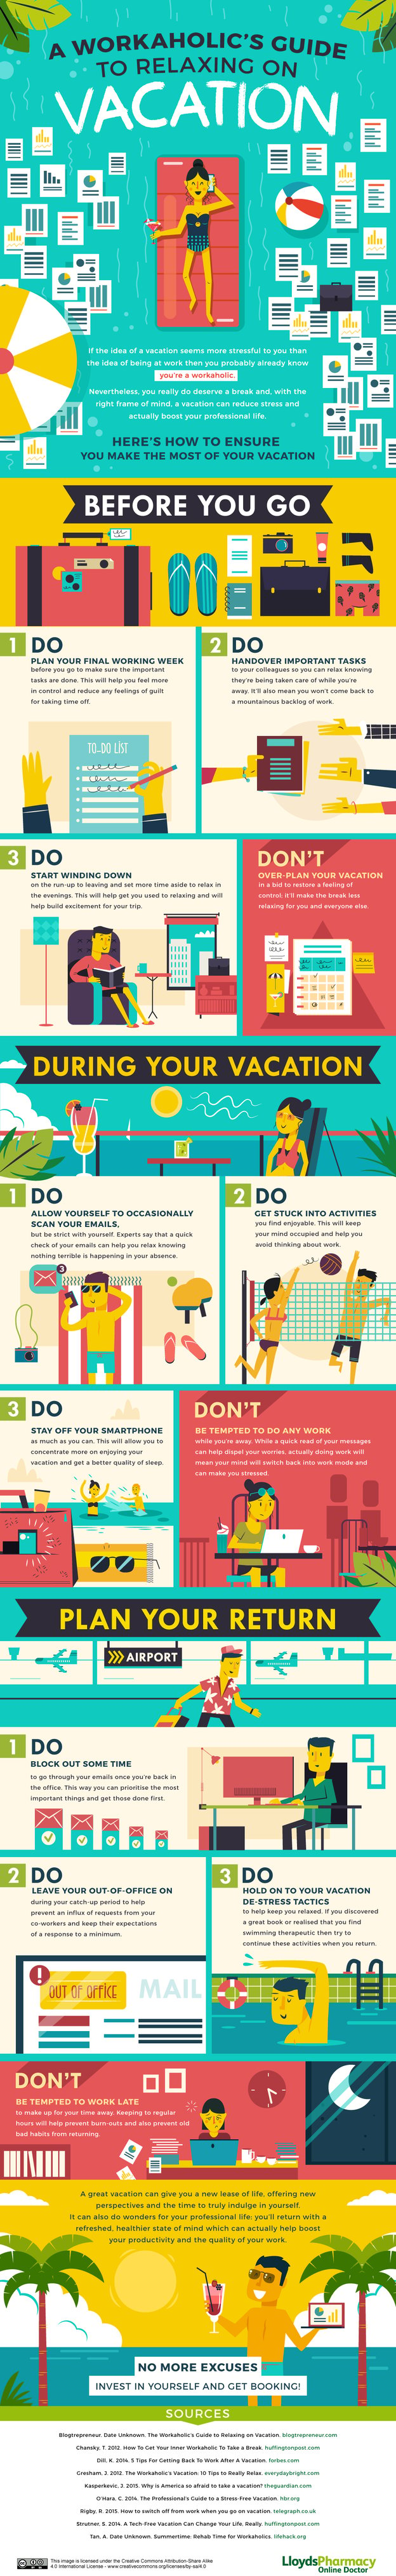 workaholic's guide to relaxing on vacation - infographic